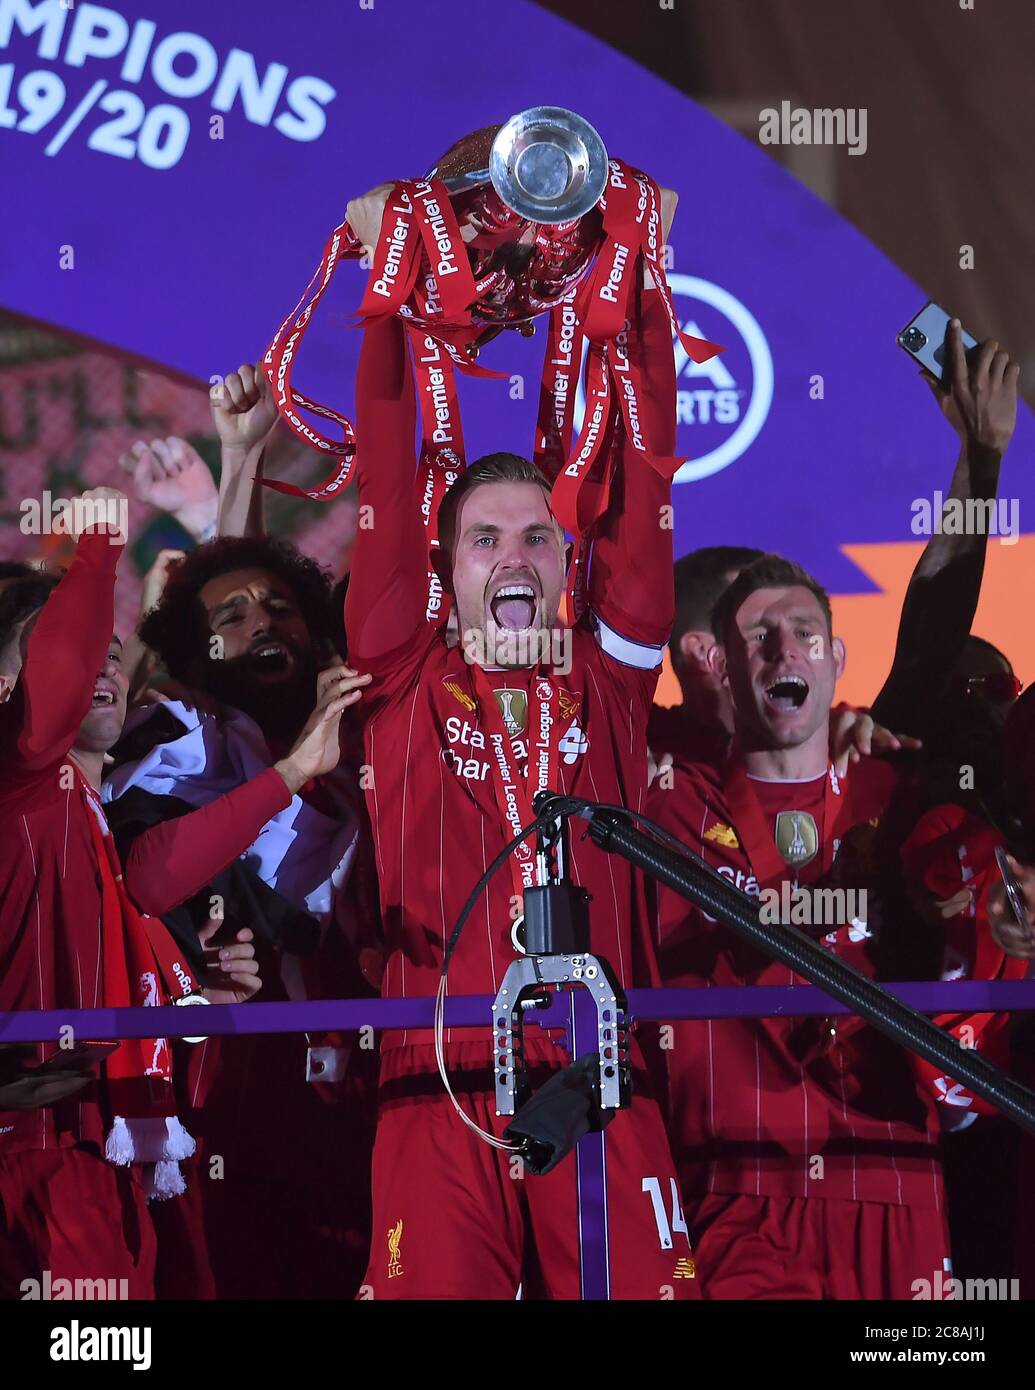 Liverpool's Jordan Henderson celebrates with the Premier League trophy after the Premier League match at Anfield, Liverpool. Stock Photo